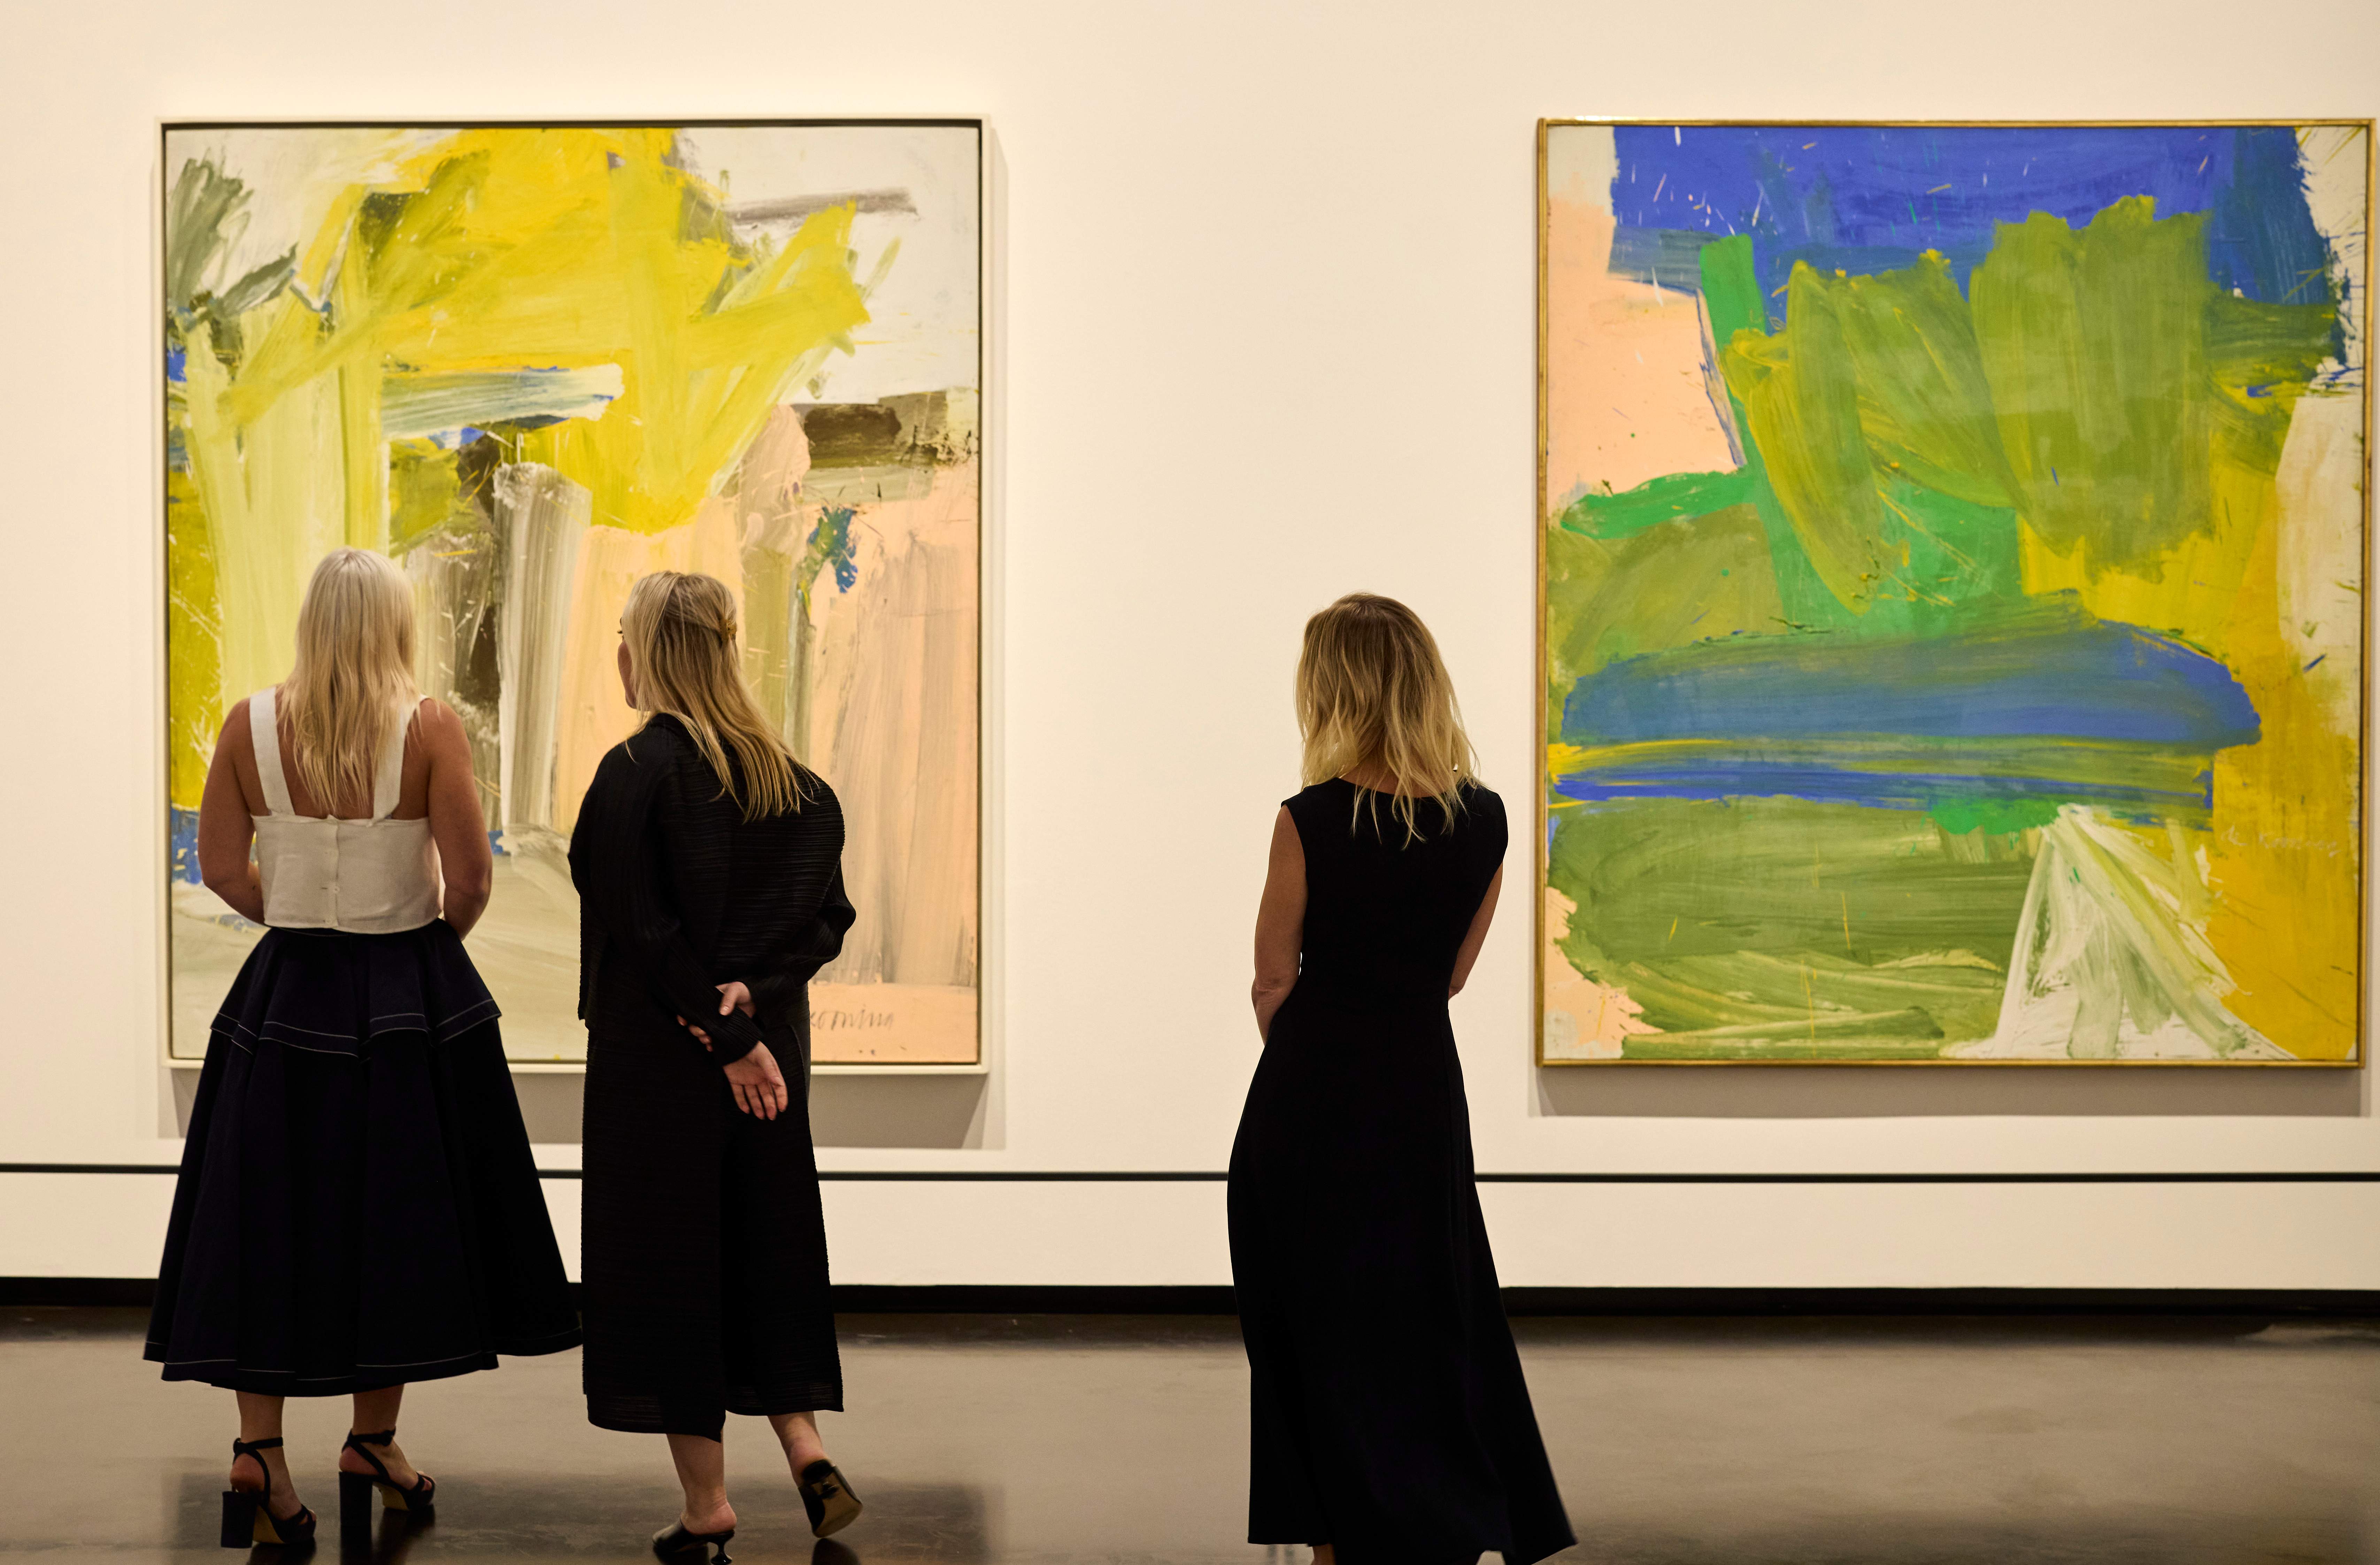 8.-installation-view_willem-de-kooning-and-italy_gallerie-dell-accademia-venice-2024__c-2024-the-willem-de-kooning-foundation-siae_photo-by-david-levene-2024.jpg